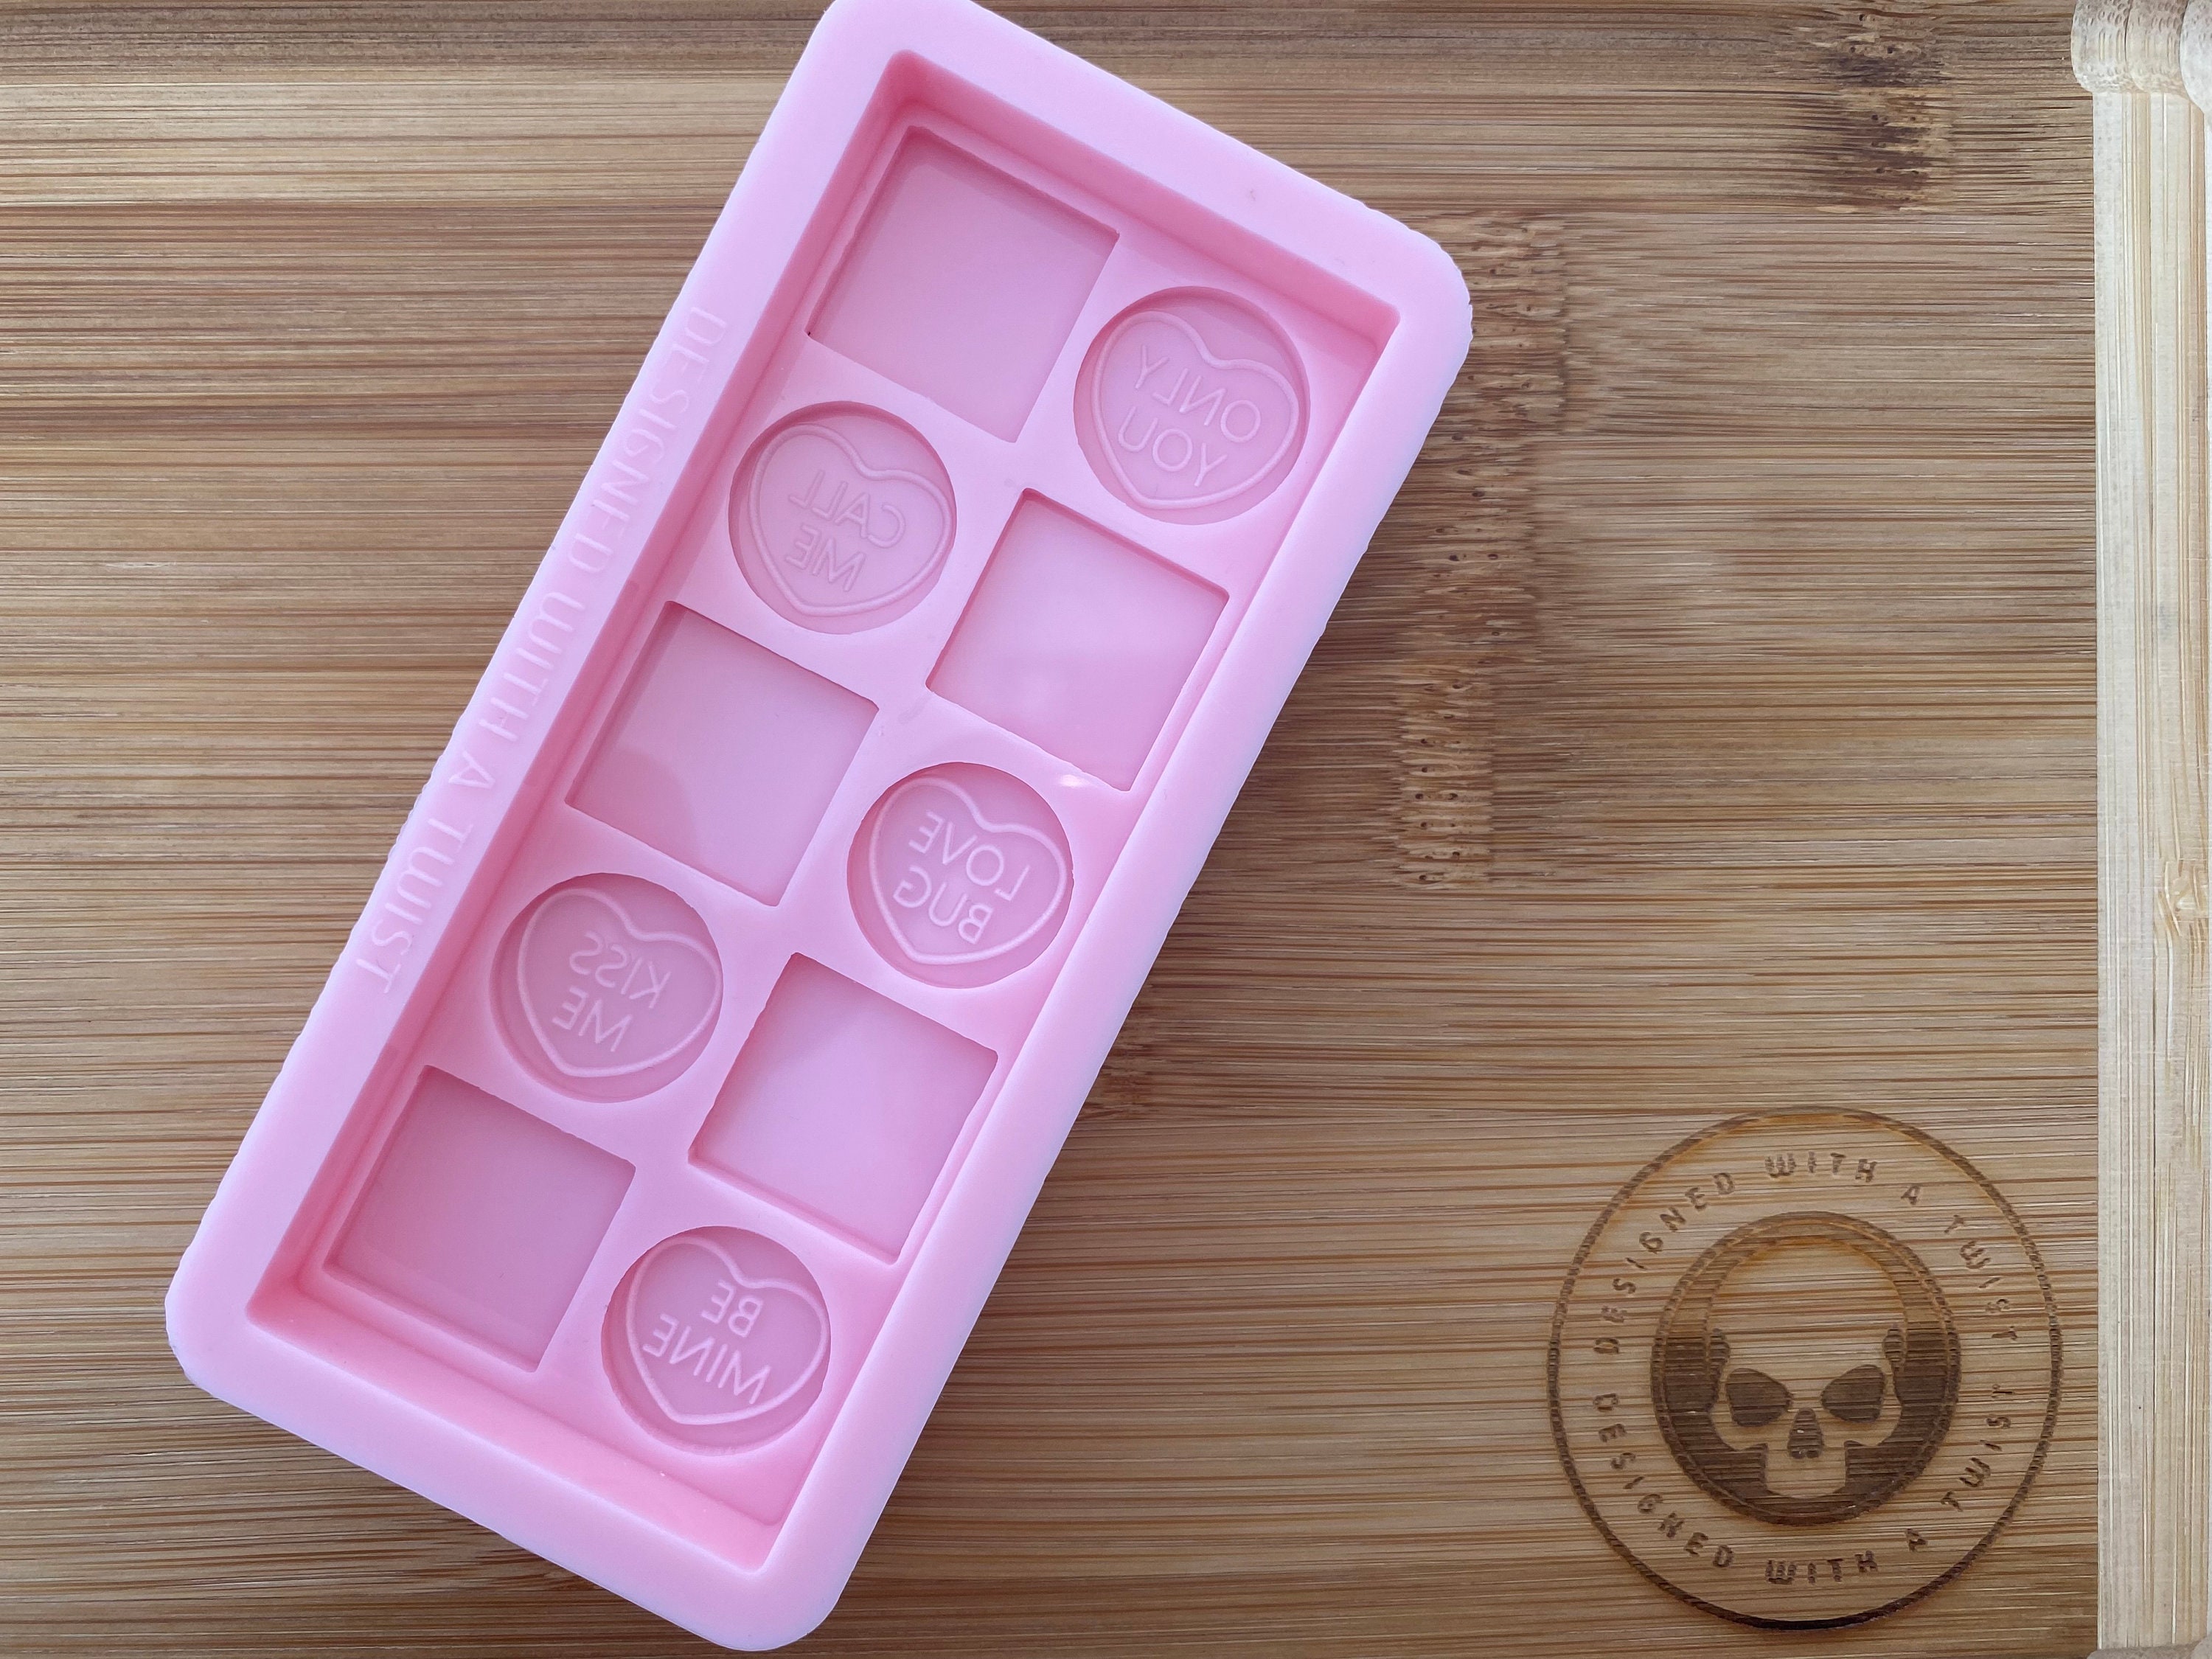 Snap Bar Silicone Mould (6 x 5), Wax Melts